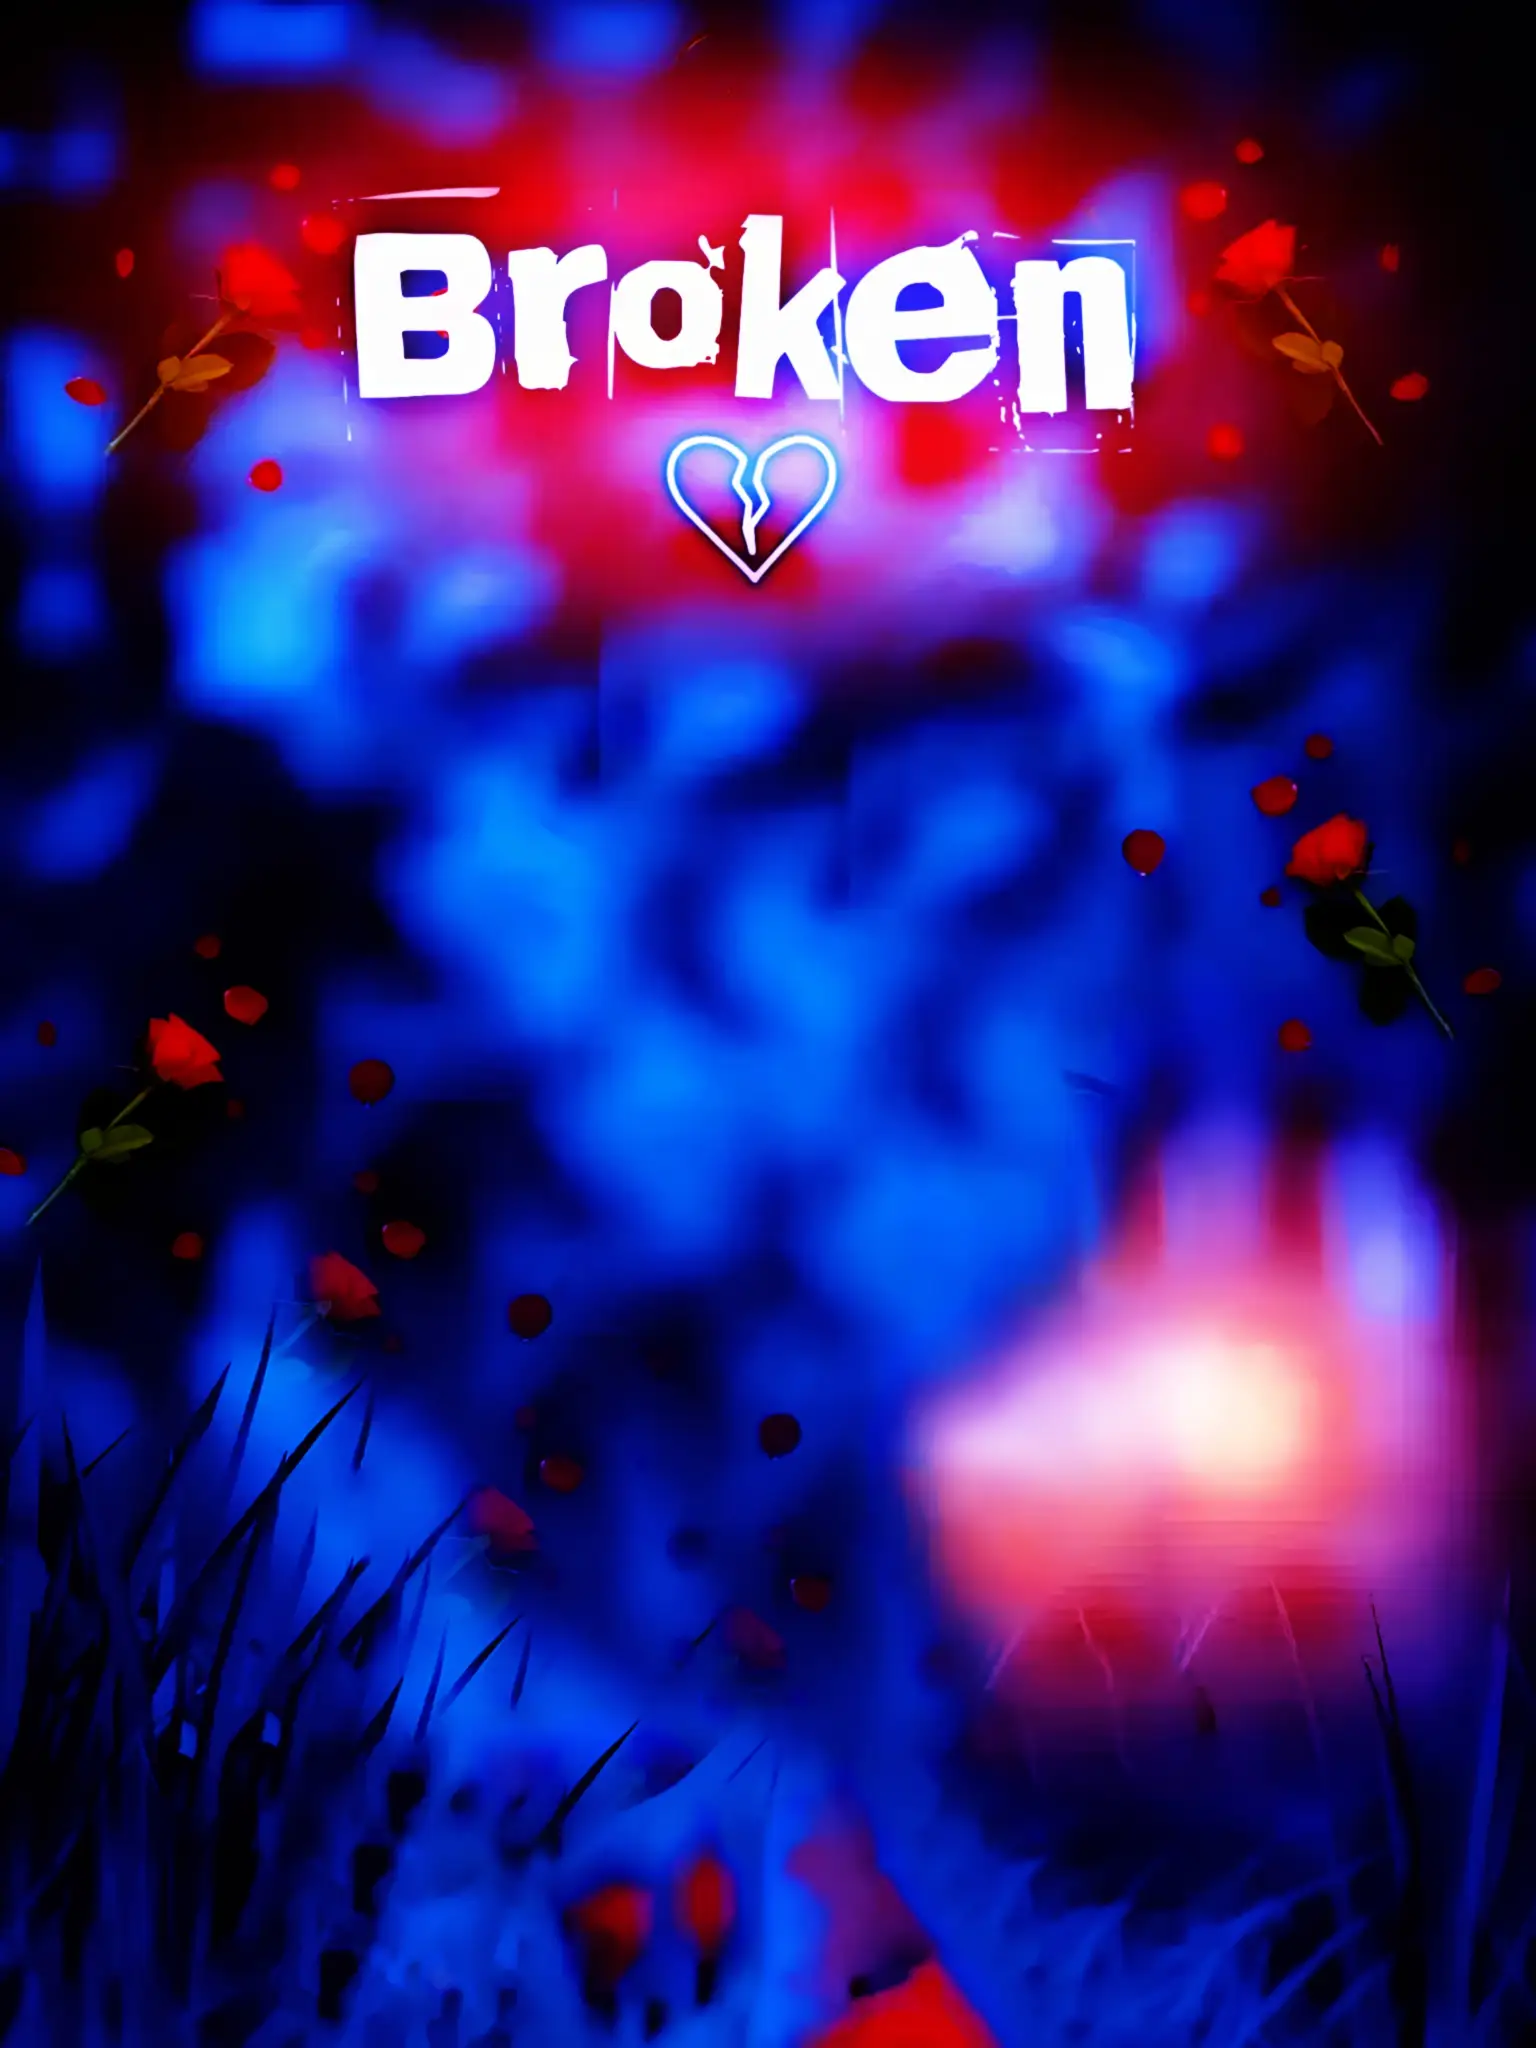 You are currently viewing Broken editing background download hd